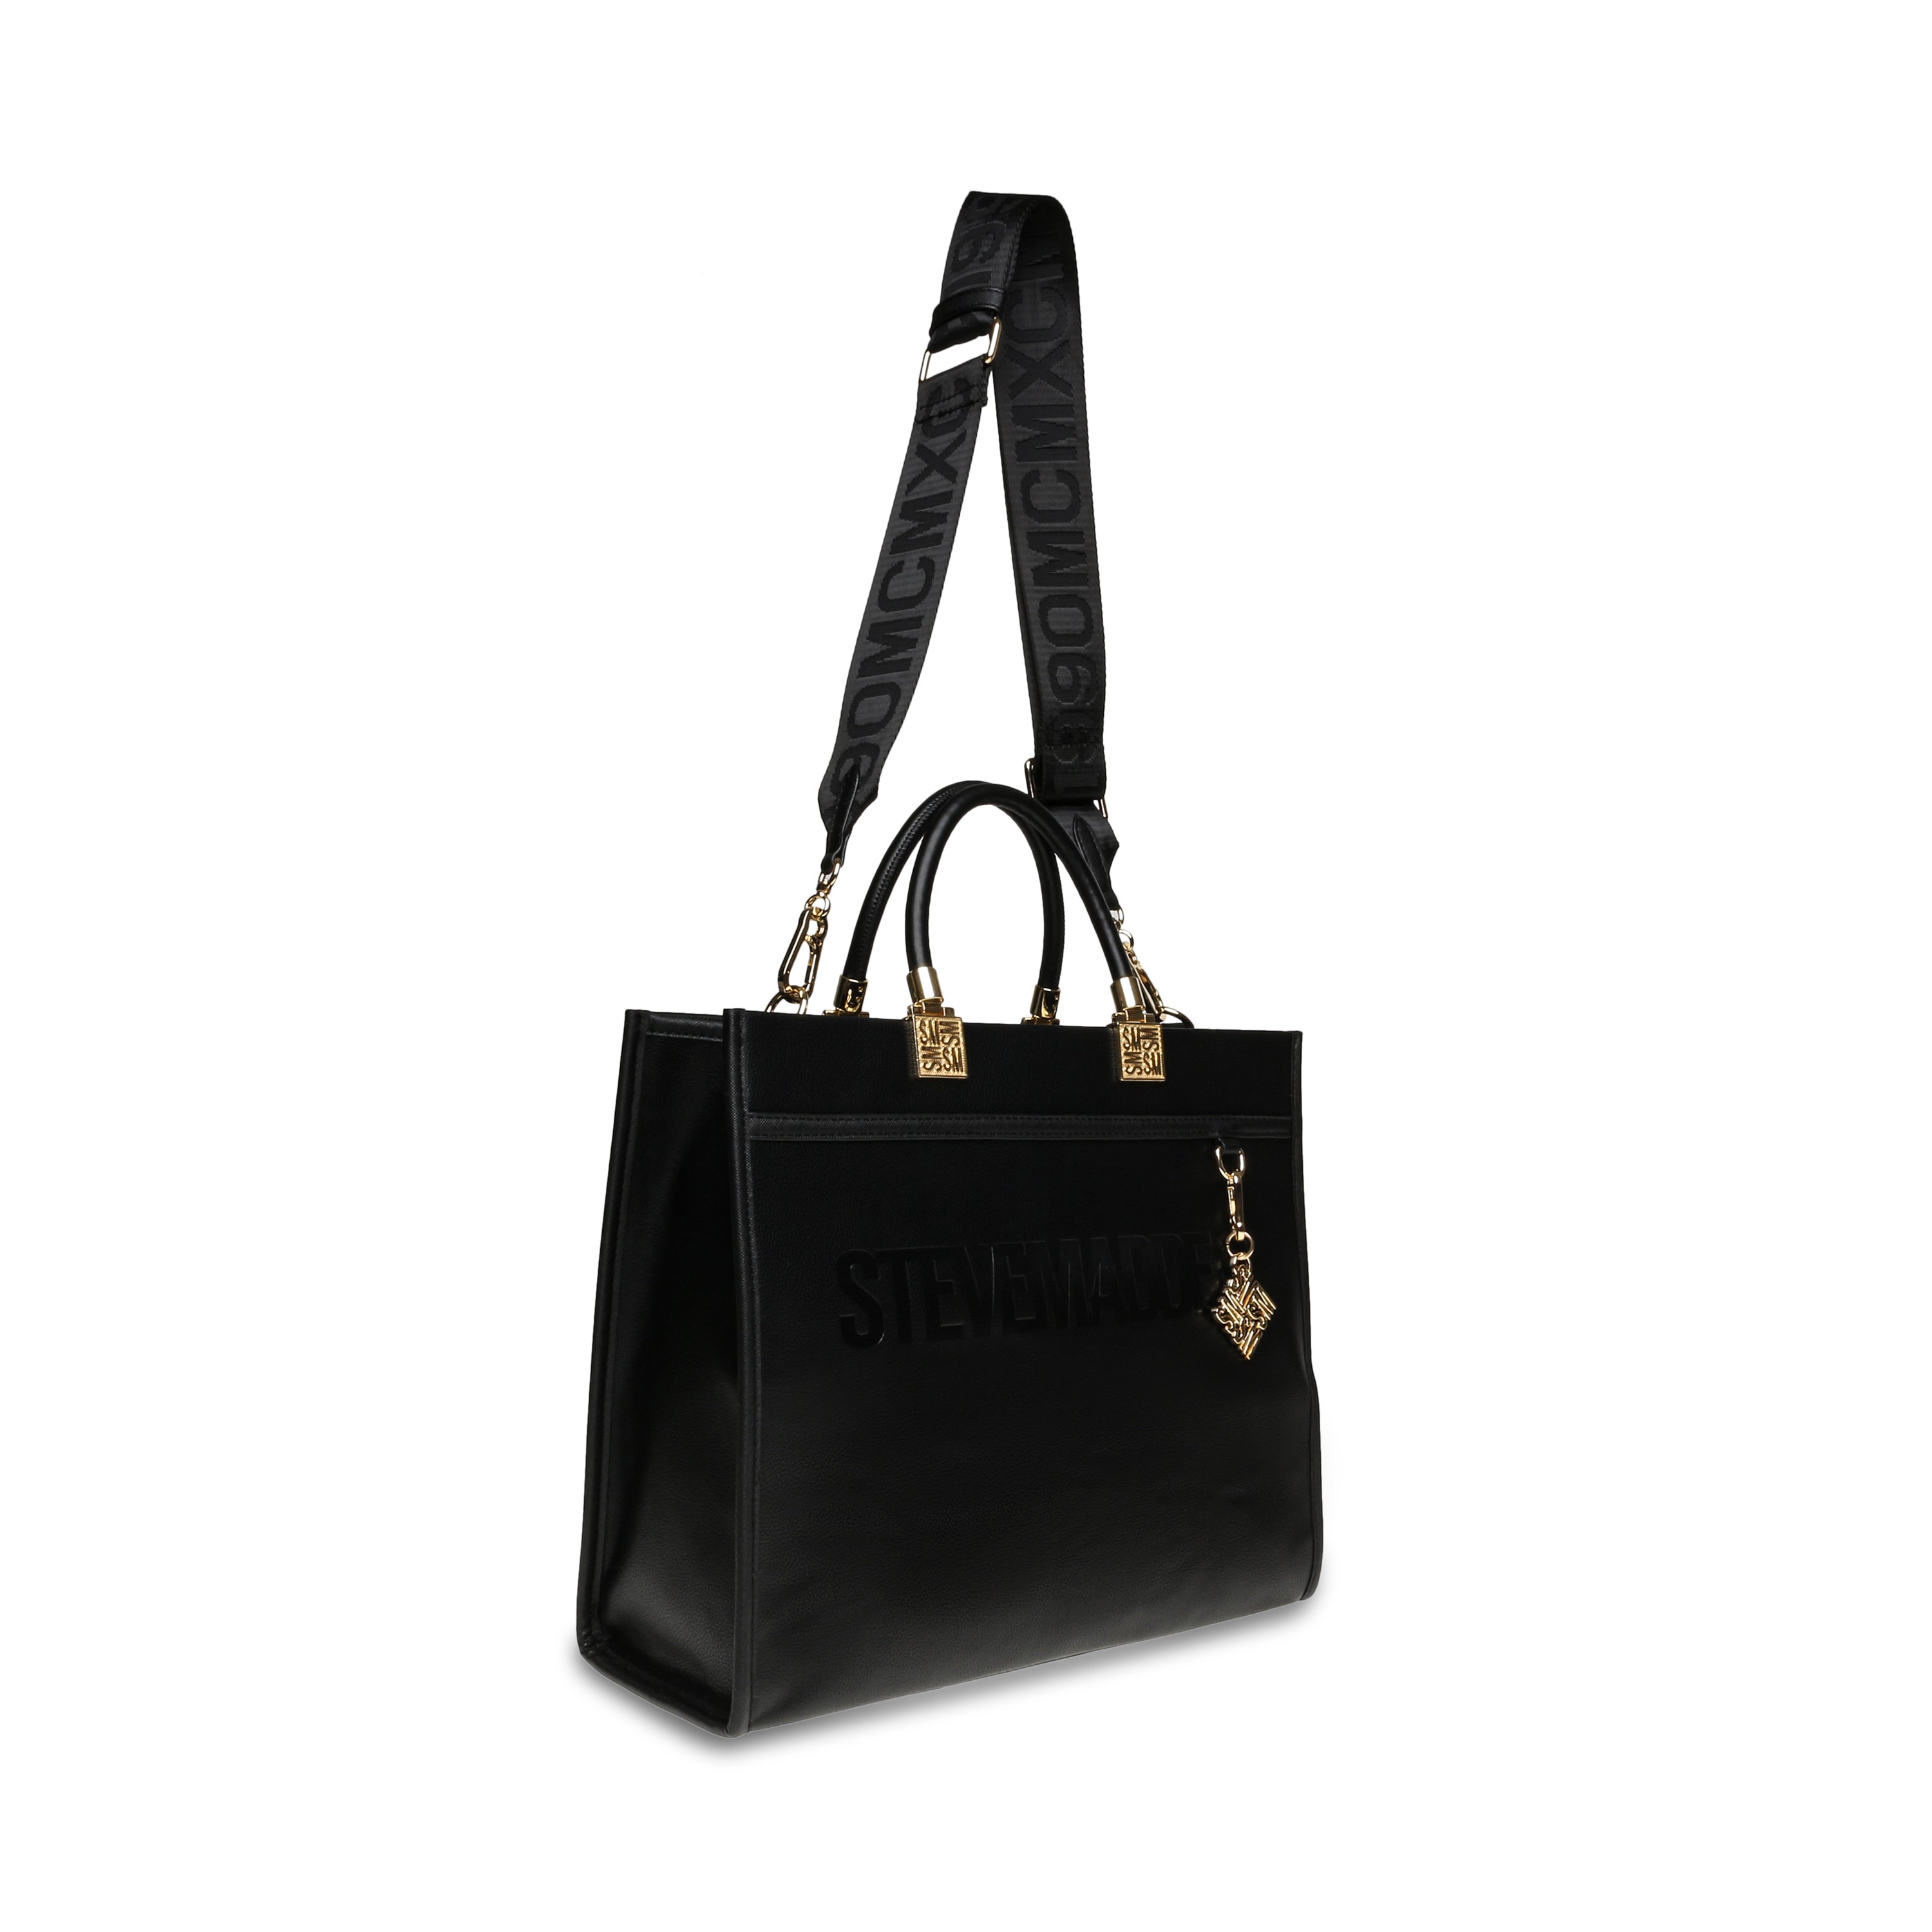 BRICHES BLACK/GOLD TOTE BAG- Hover Image